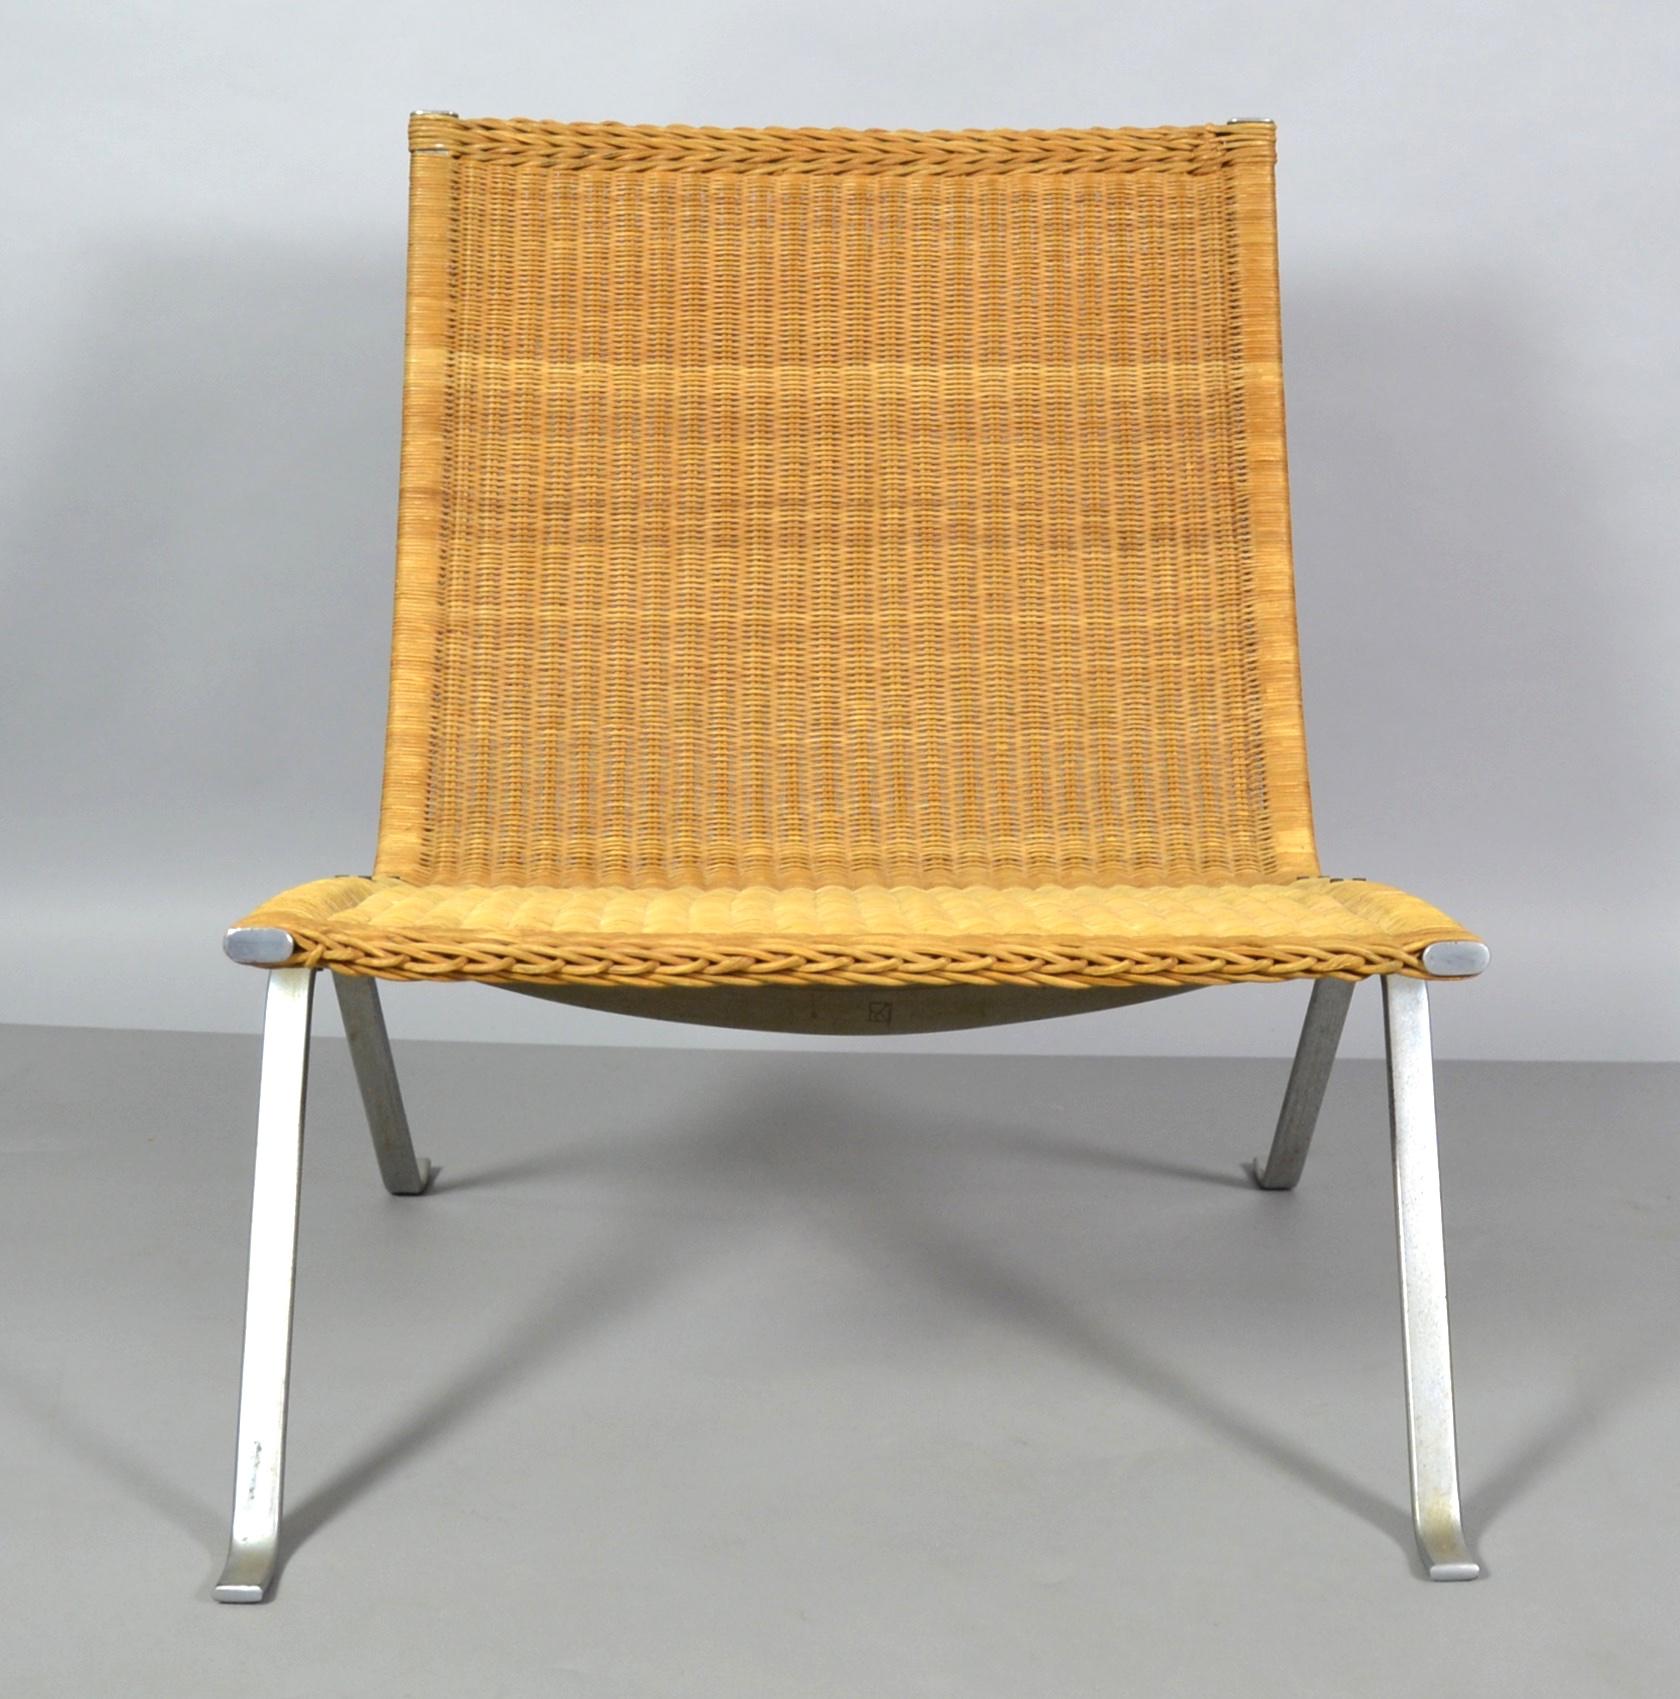 Design: Poul Kjærholm in the 1950s
Manufacturer: Kold Christensen
Model: PK22
Steel frame with wicker.
Old original chair from the first manufacturer Kold Christensen, who was friends with Poul Kjærholm.
Today the chair is produced by Fritz